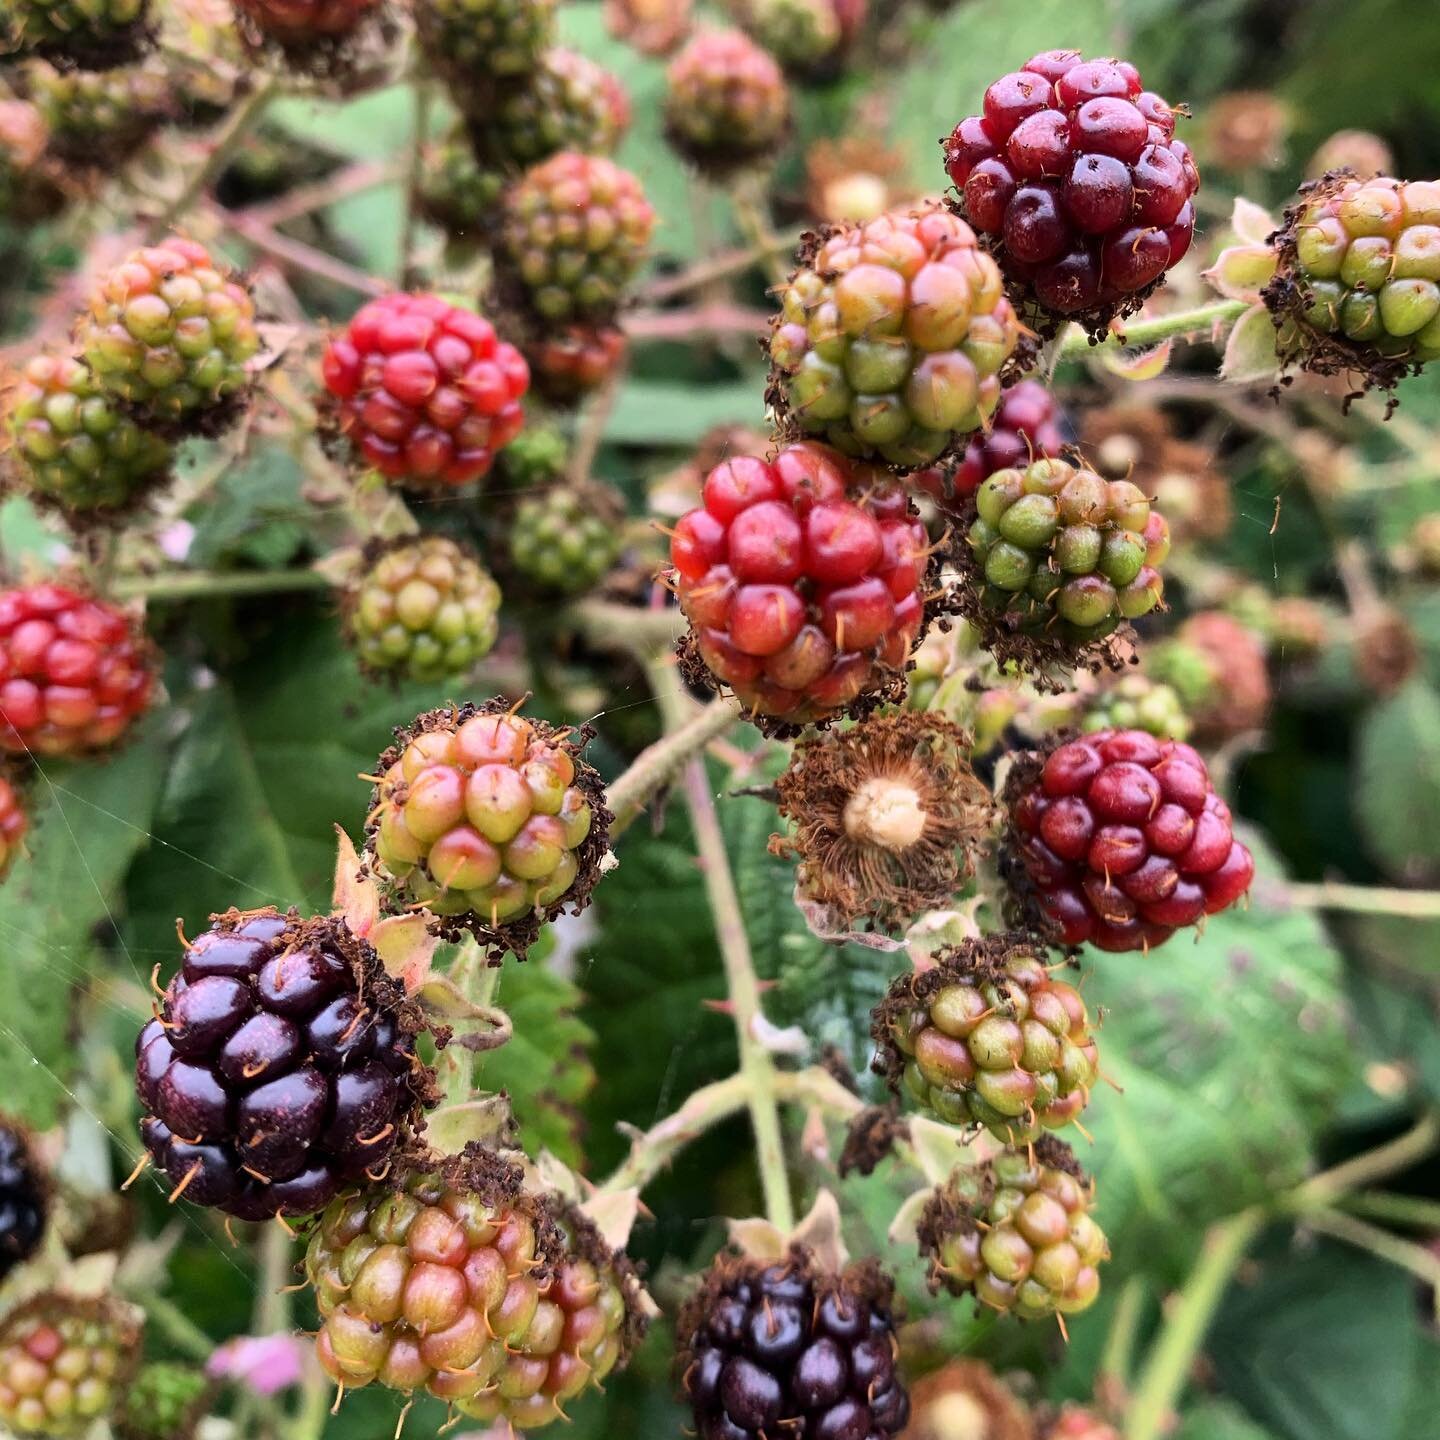 Posting a picture of berries because they&rsquo;re so much prettier than the #Debates2020 
Hard to believe that out of 320 million people, we chose our current leadership. #vote #truth #lovewins #eatberries @truth